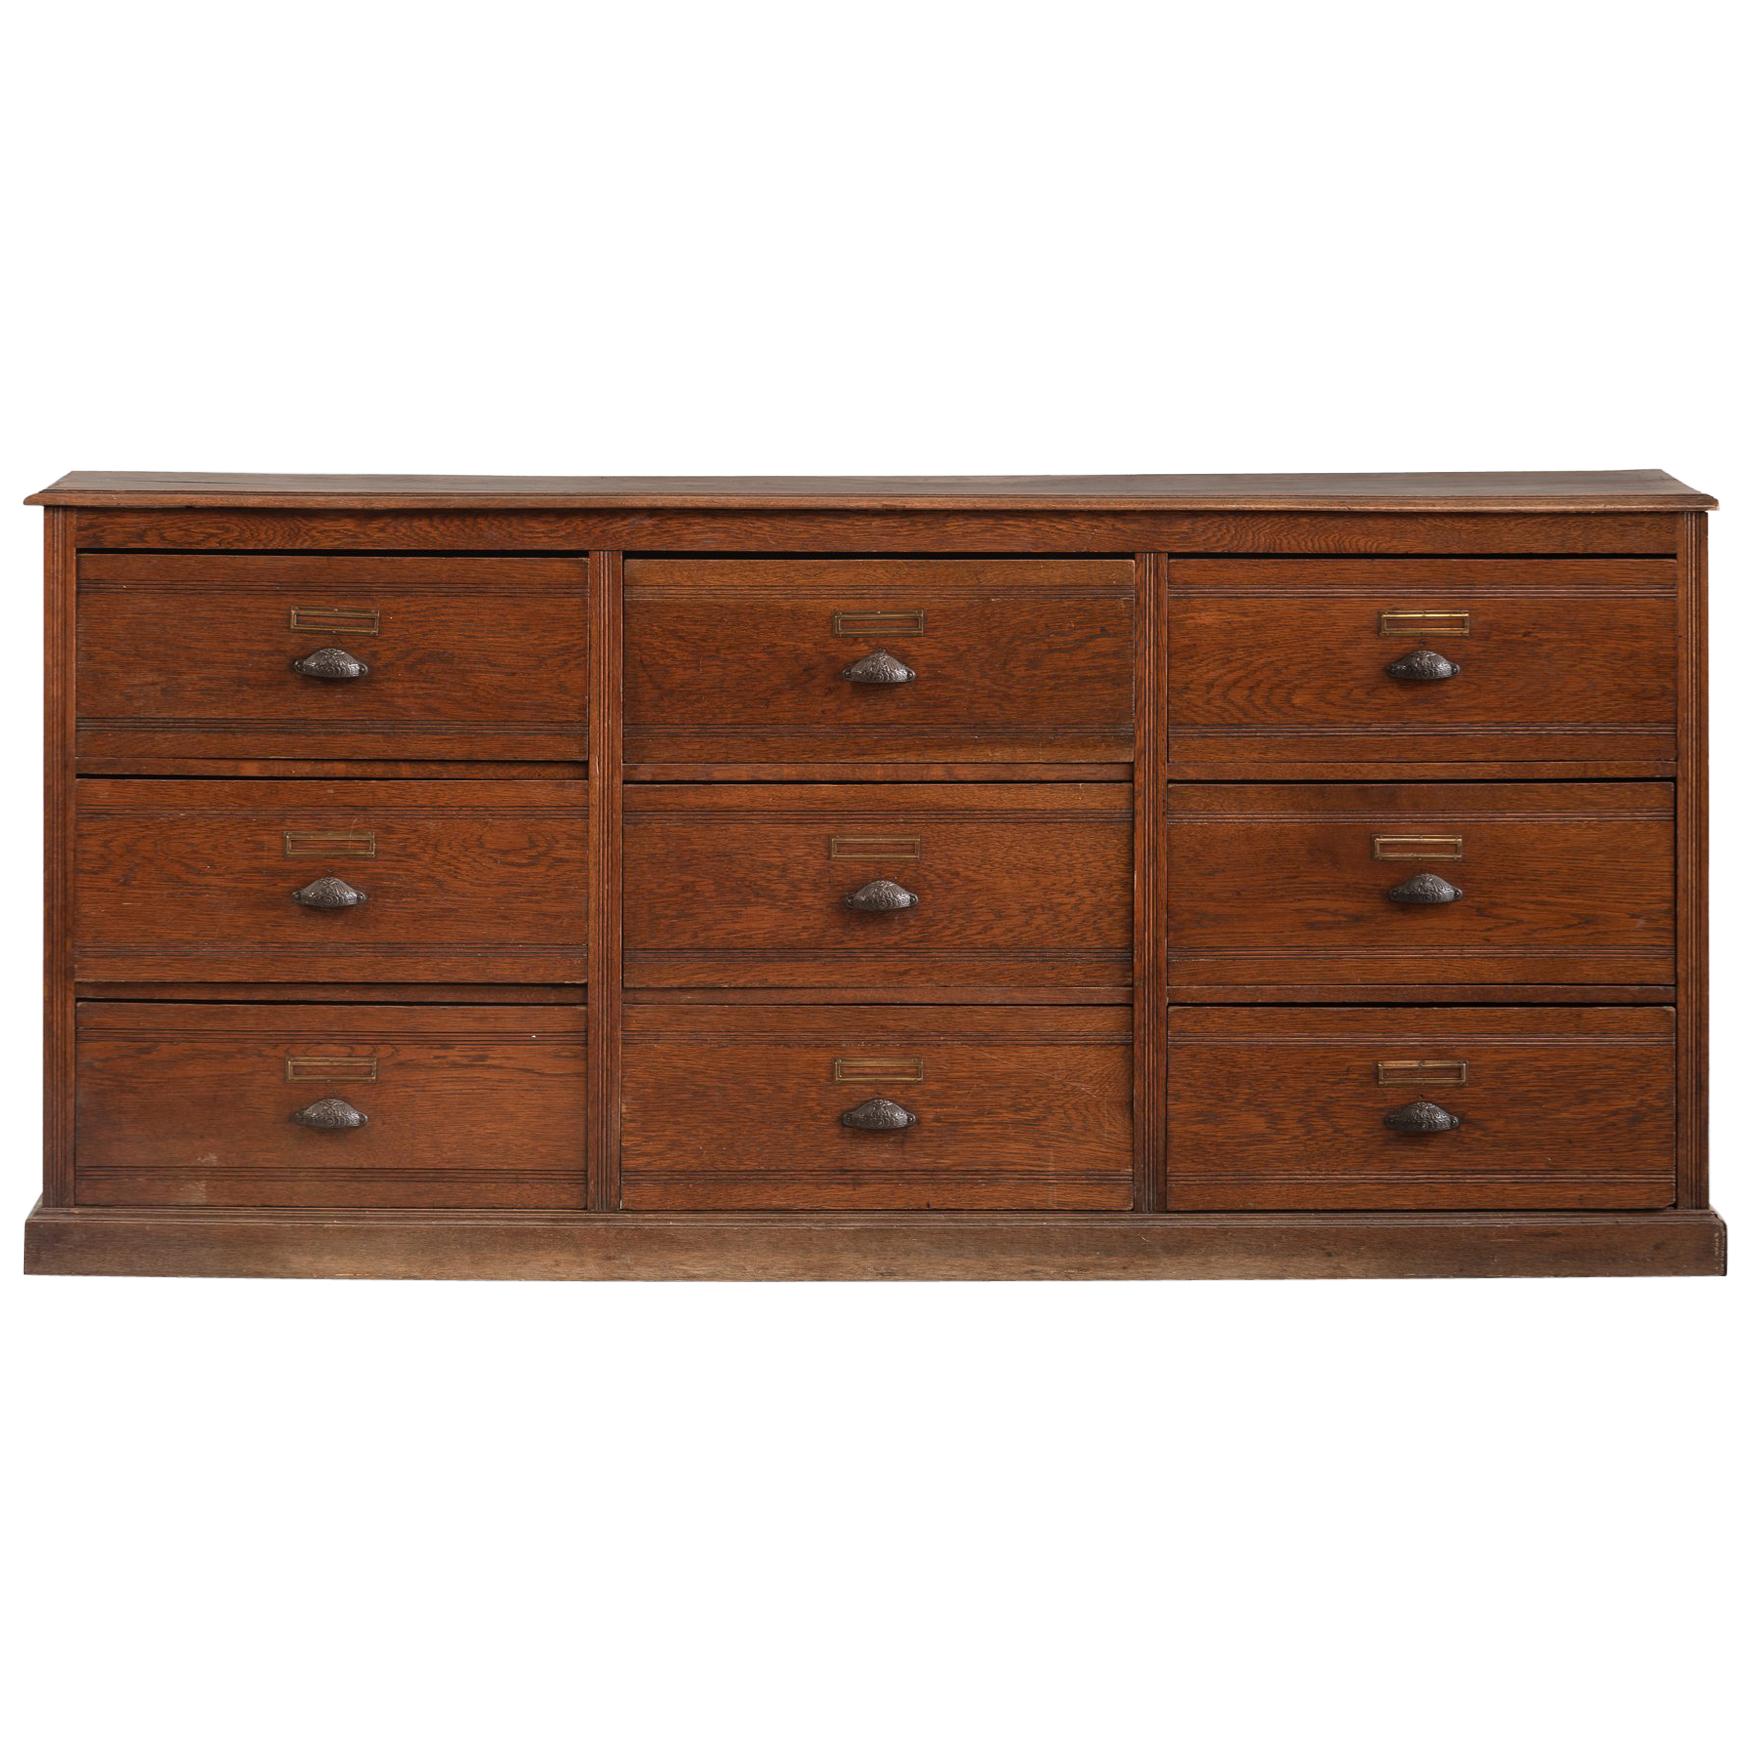 Oak Chest of Drawers, circa 1920